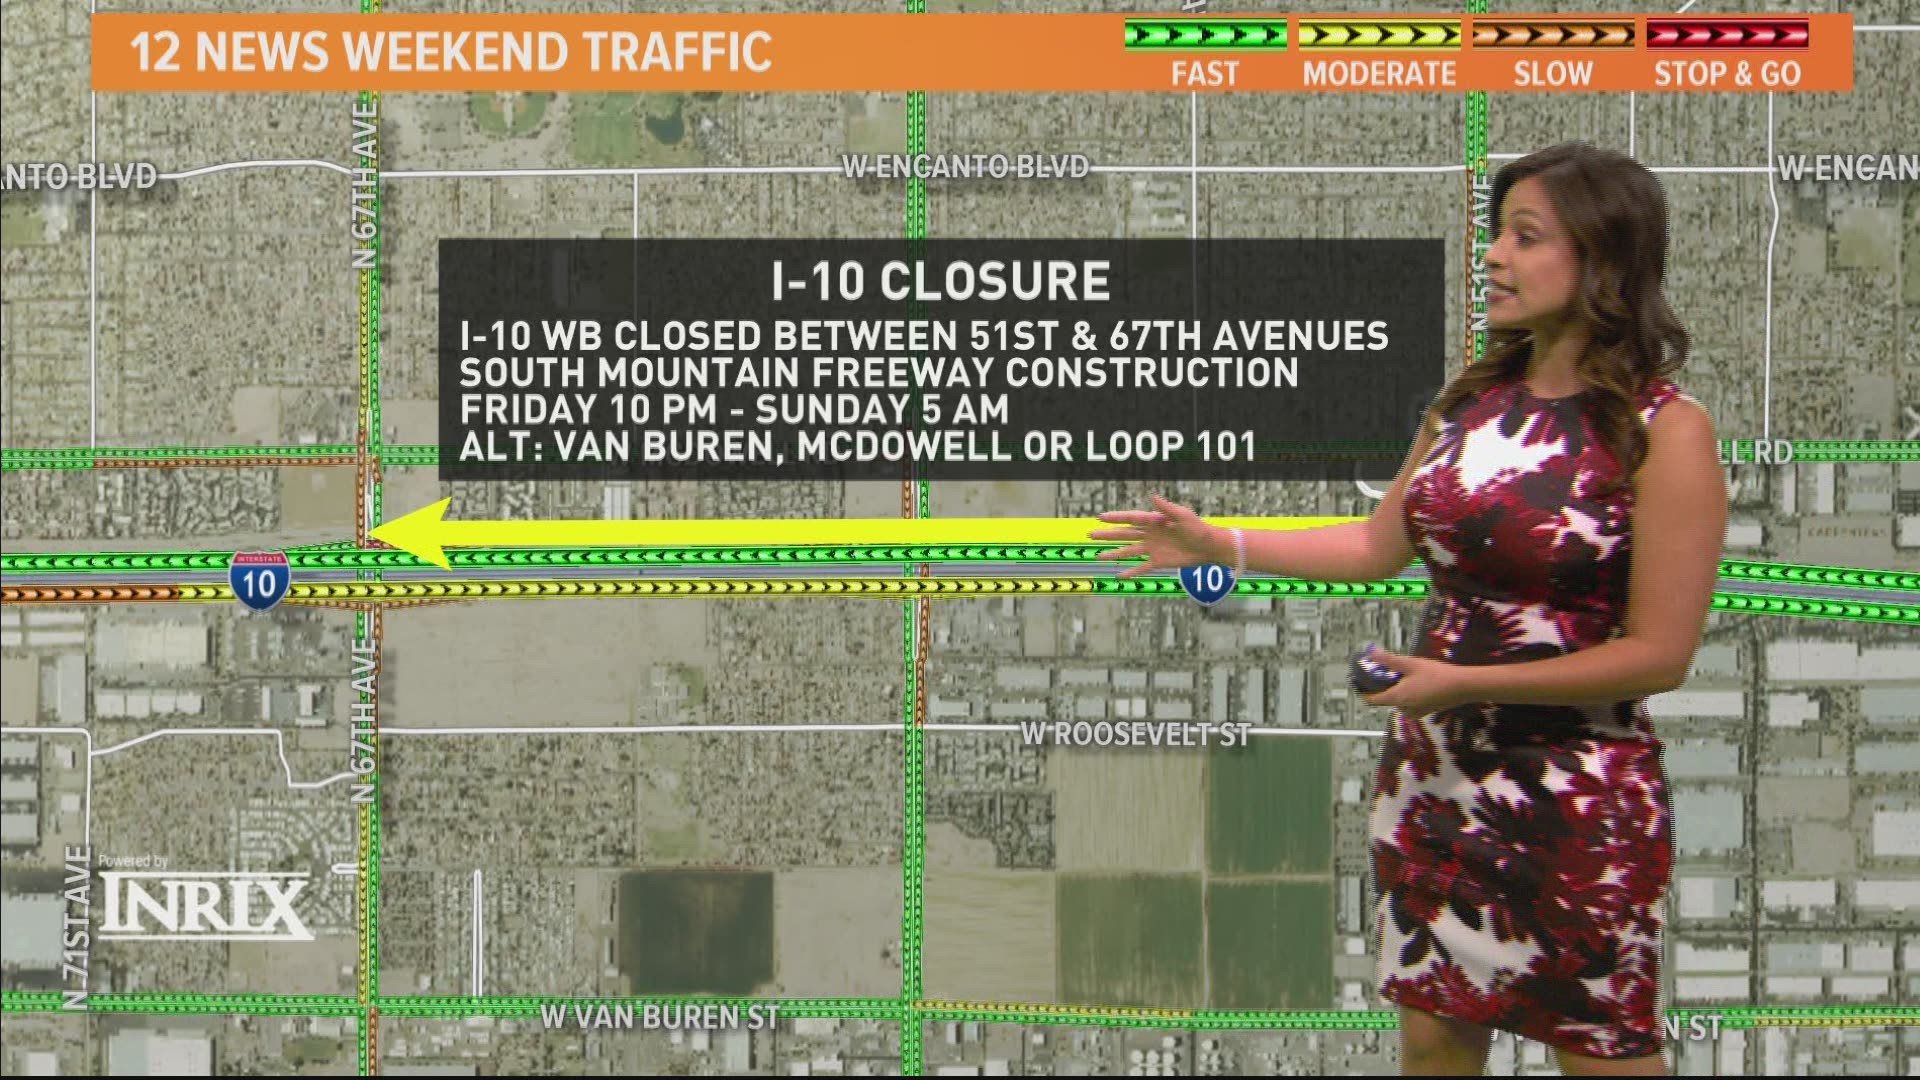 weekend traffic outlook for May 18-20